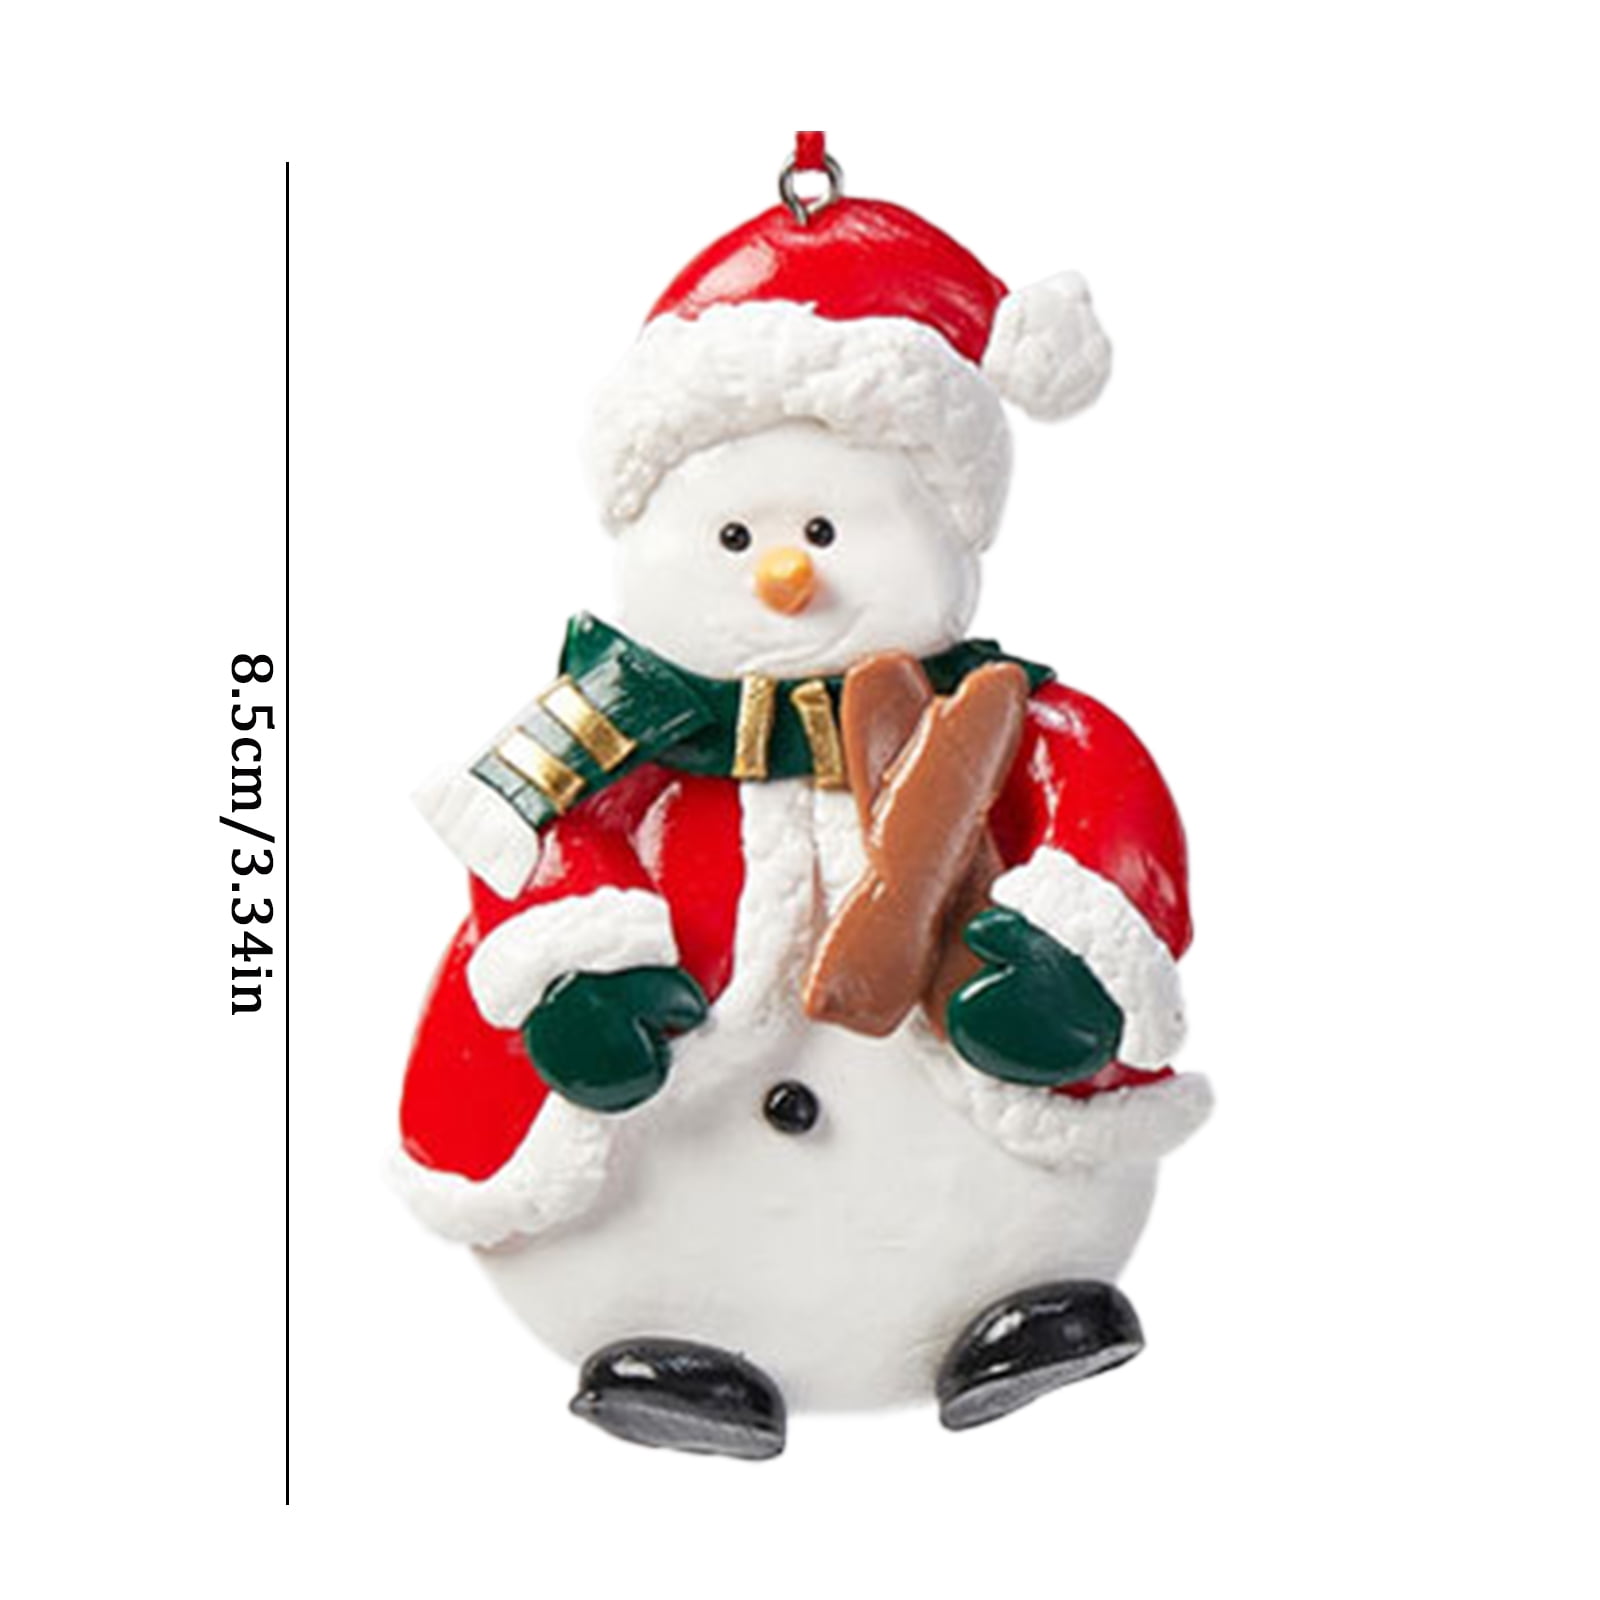 Shrinky Dinks Snowman Holiday Ornament Crafts - Metro Parent